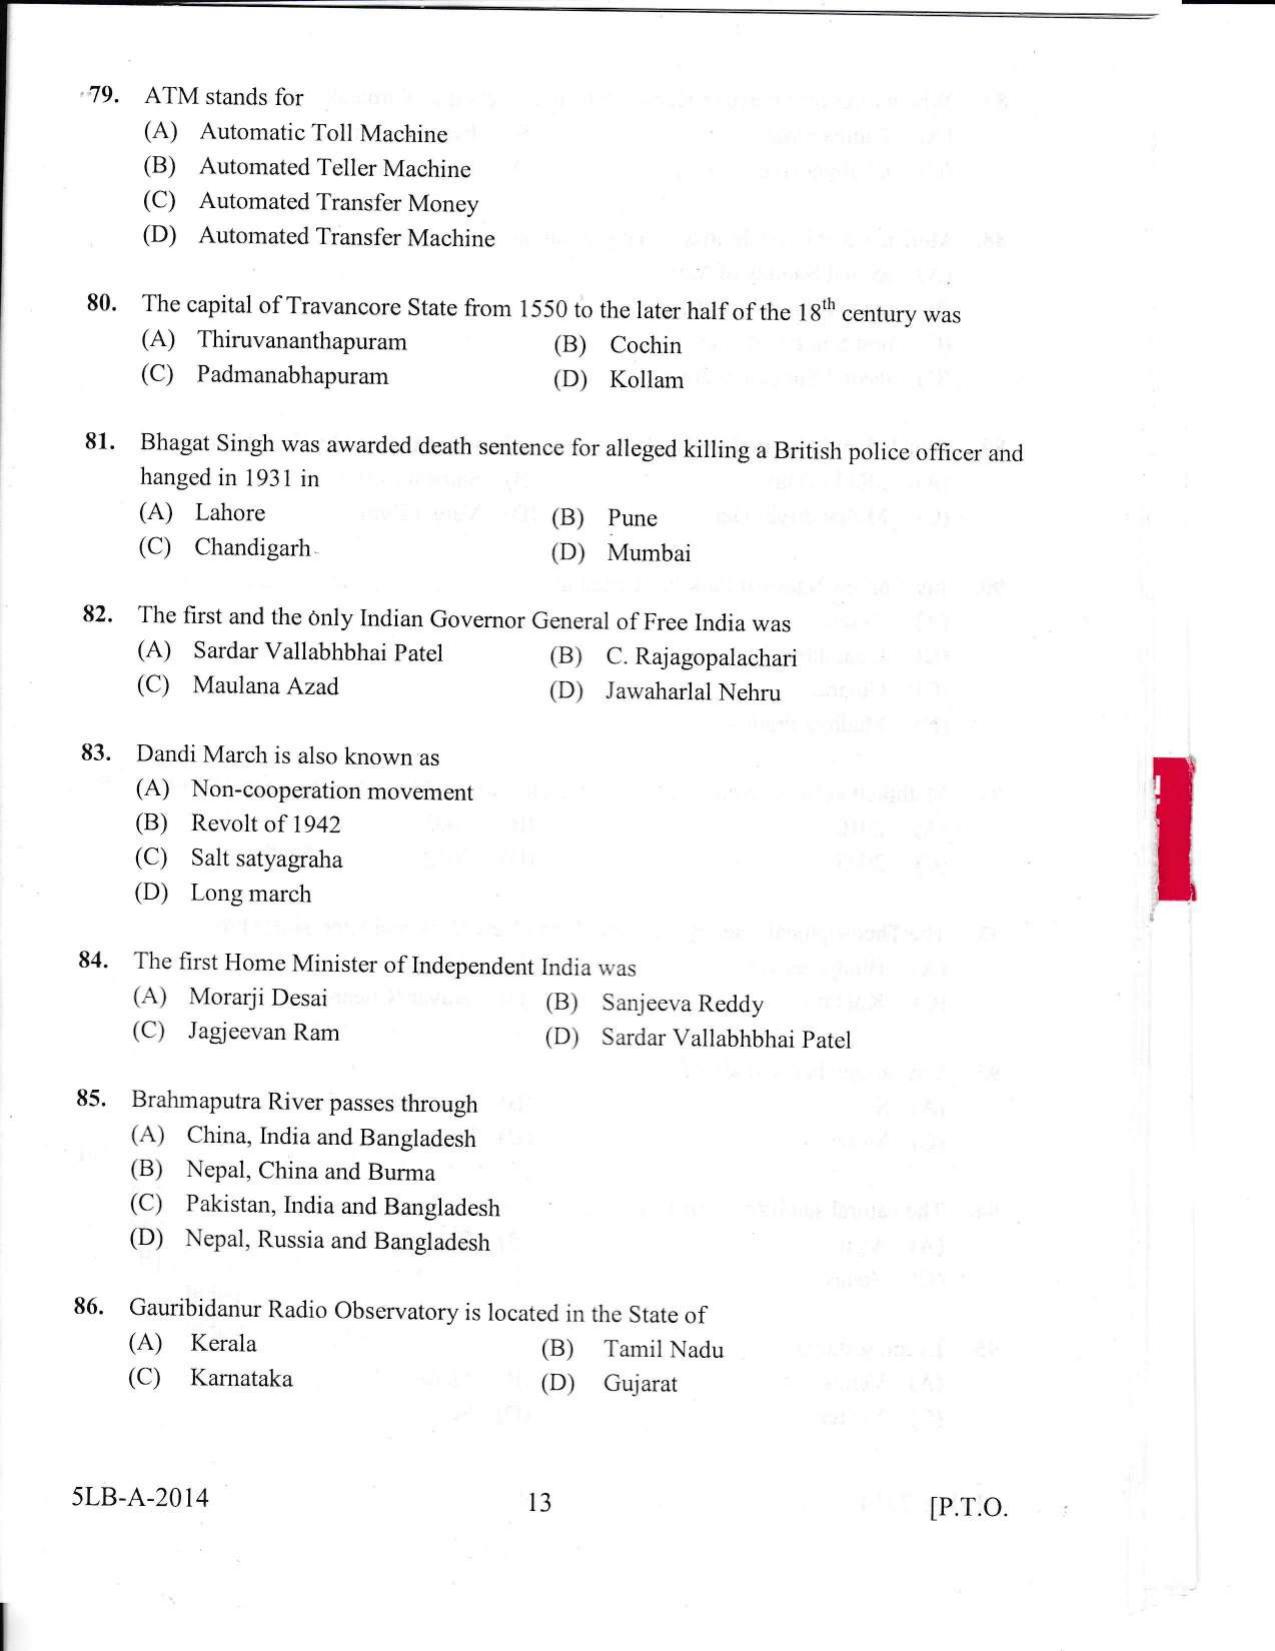 KLEE 5 Year LLB Exam 2014 Question Paper - Page 13